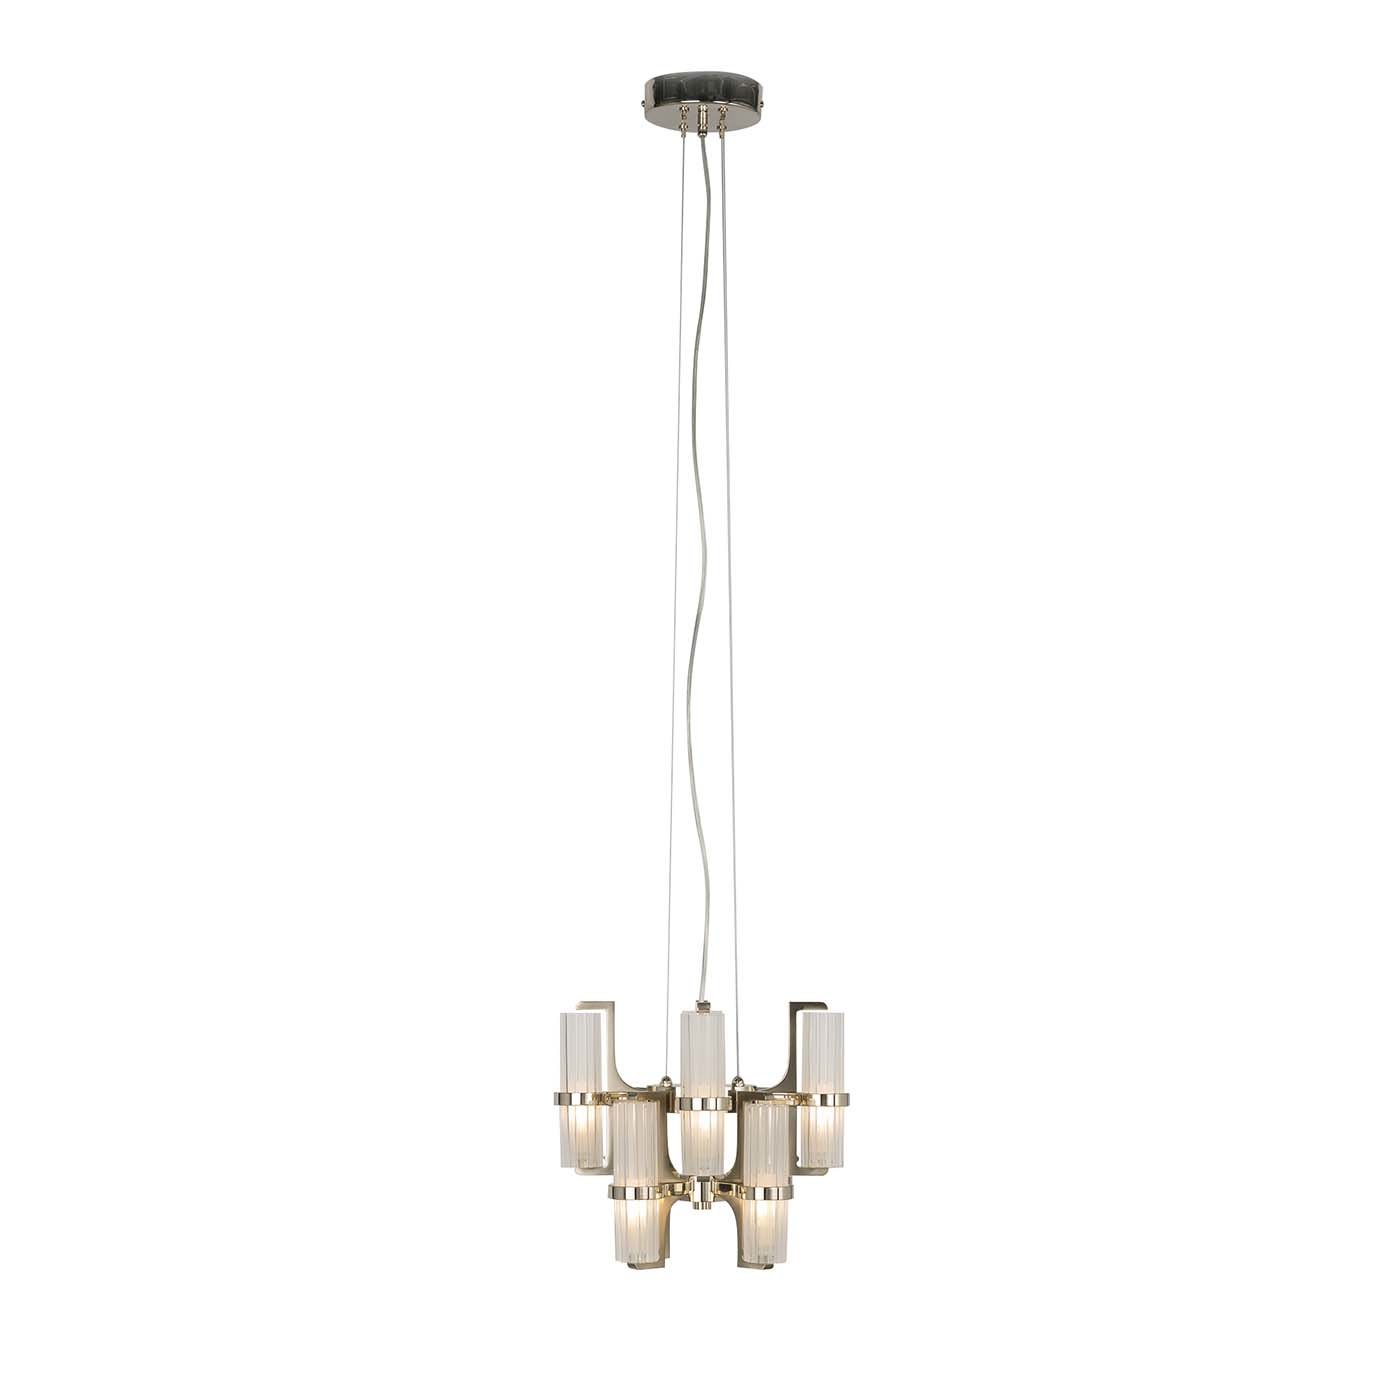 Soave Pendant Light Gold Finish by Emanuela Benedetti - Main view